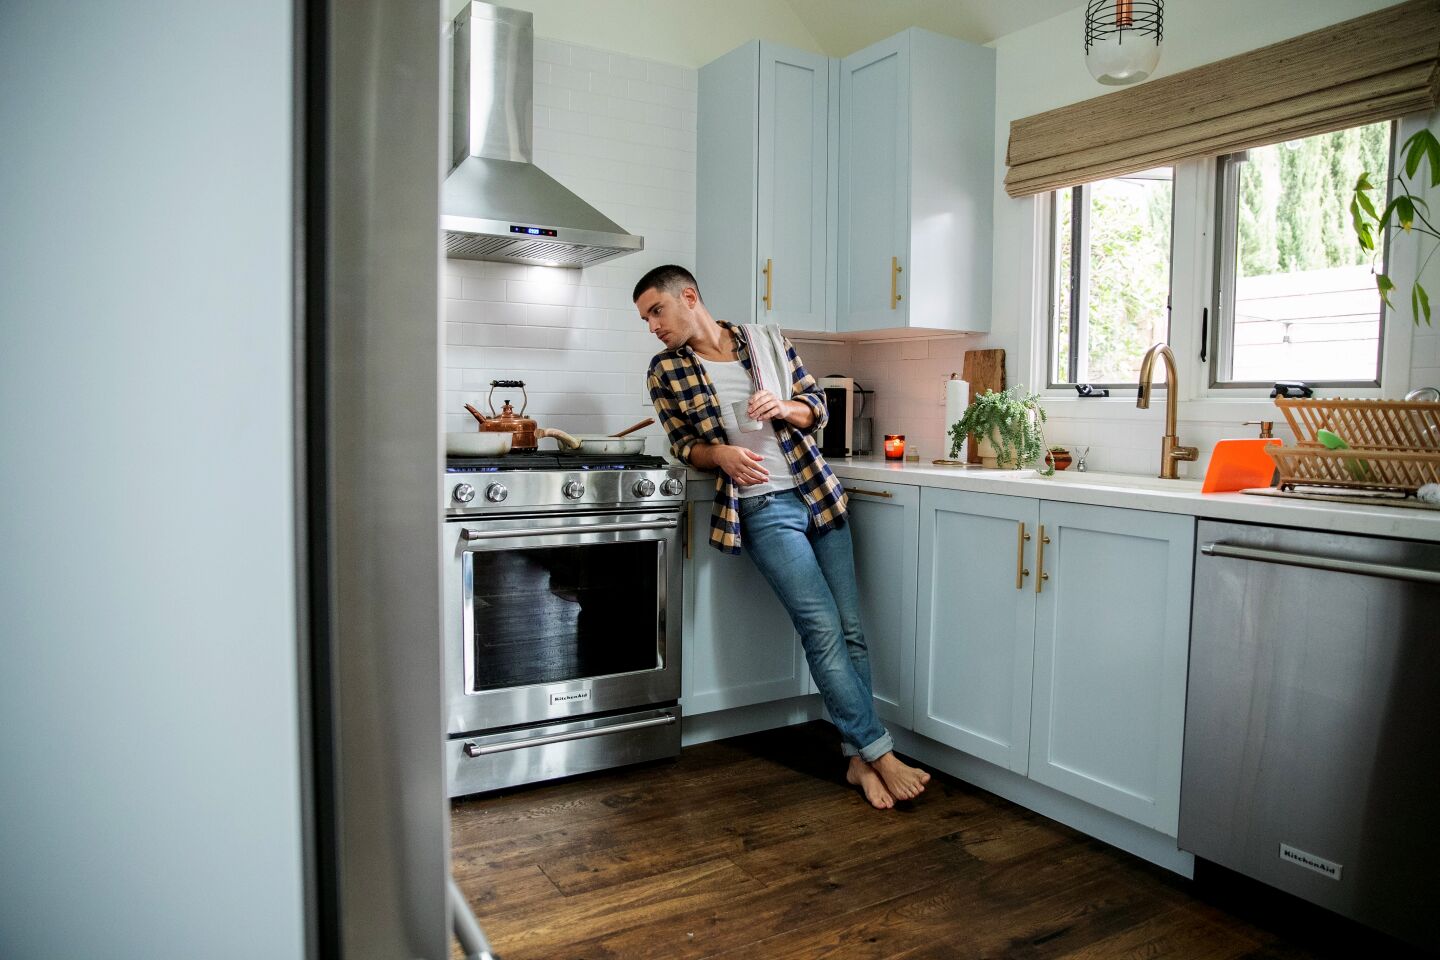 Actor Ronen Rubinstein finds that cooking in his light-filled kitchen helps him keep a positive attitude as he isolates at home. Photographed April 5, 2020. (Stephen LaMarche)